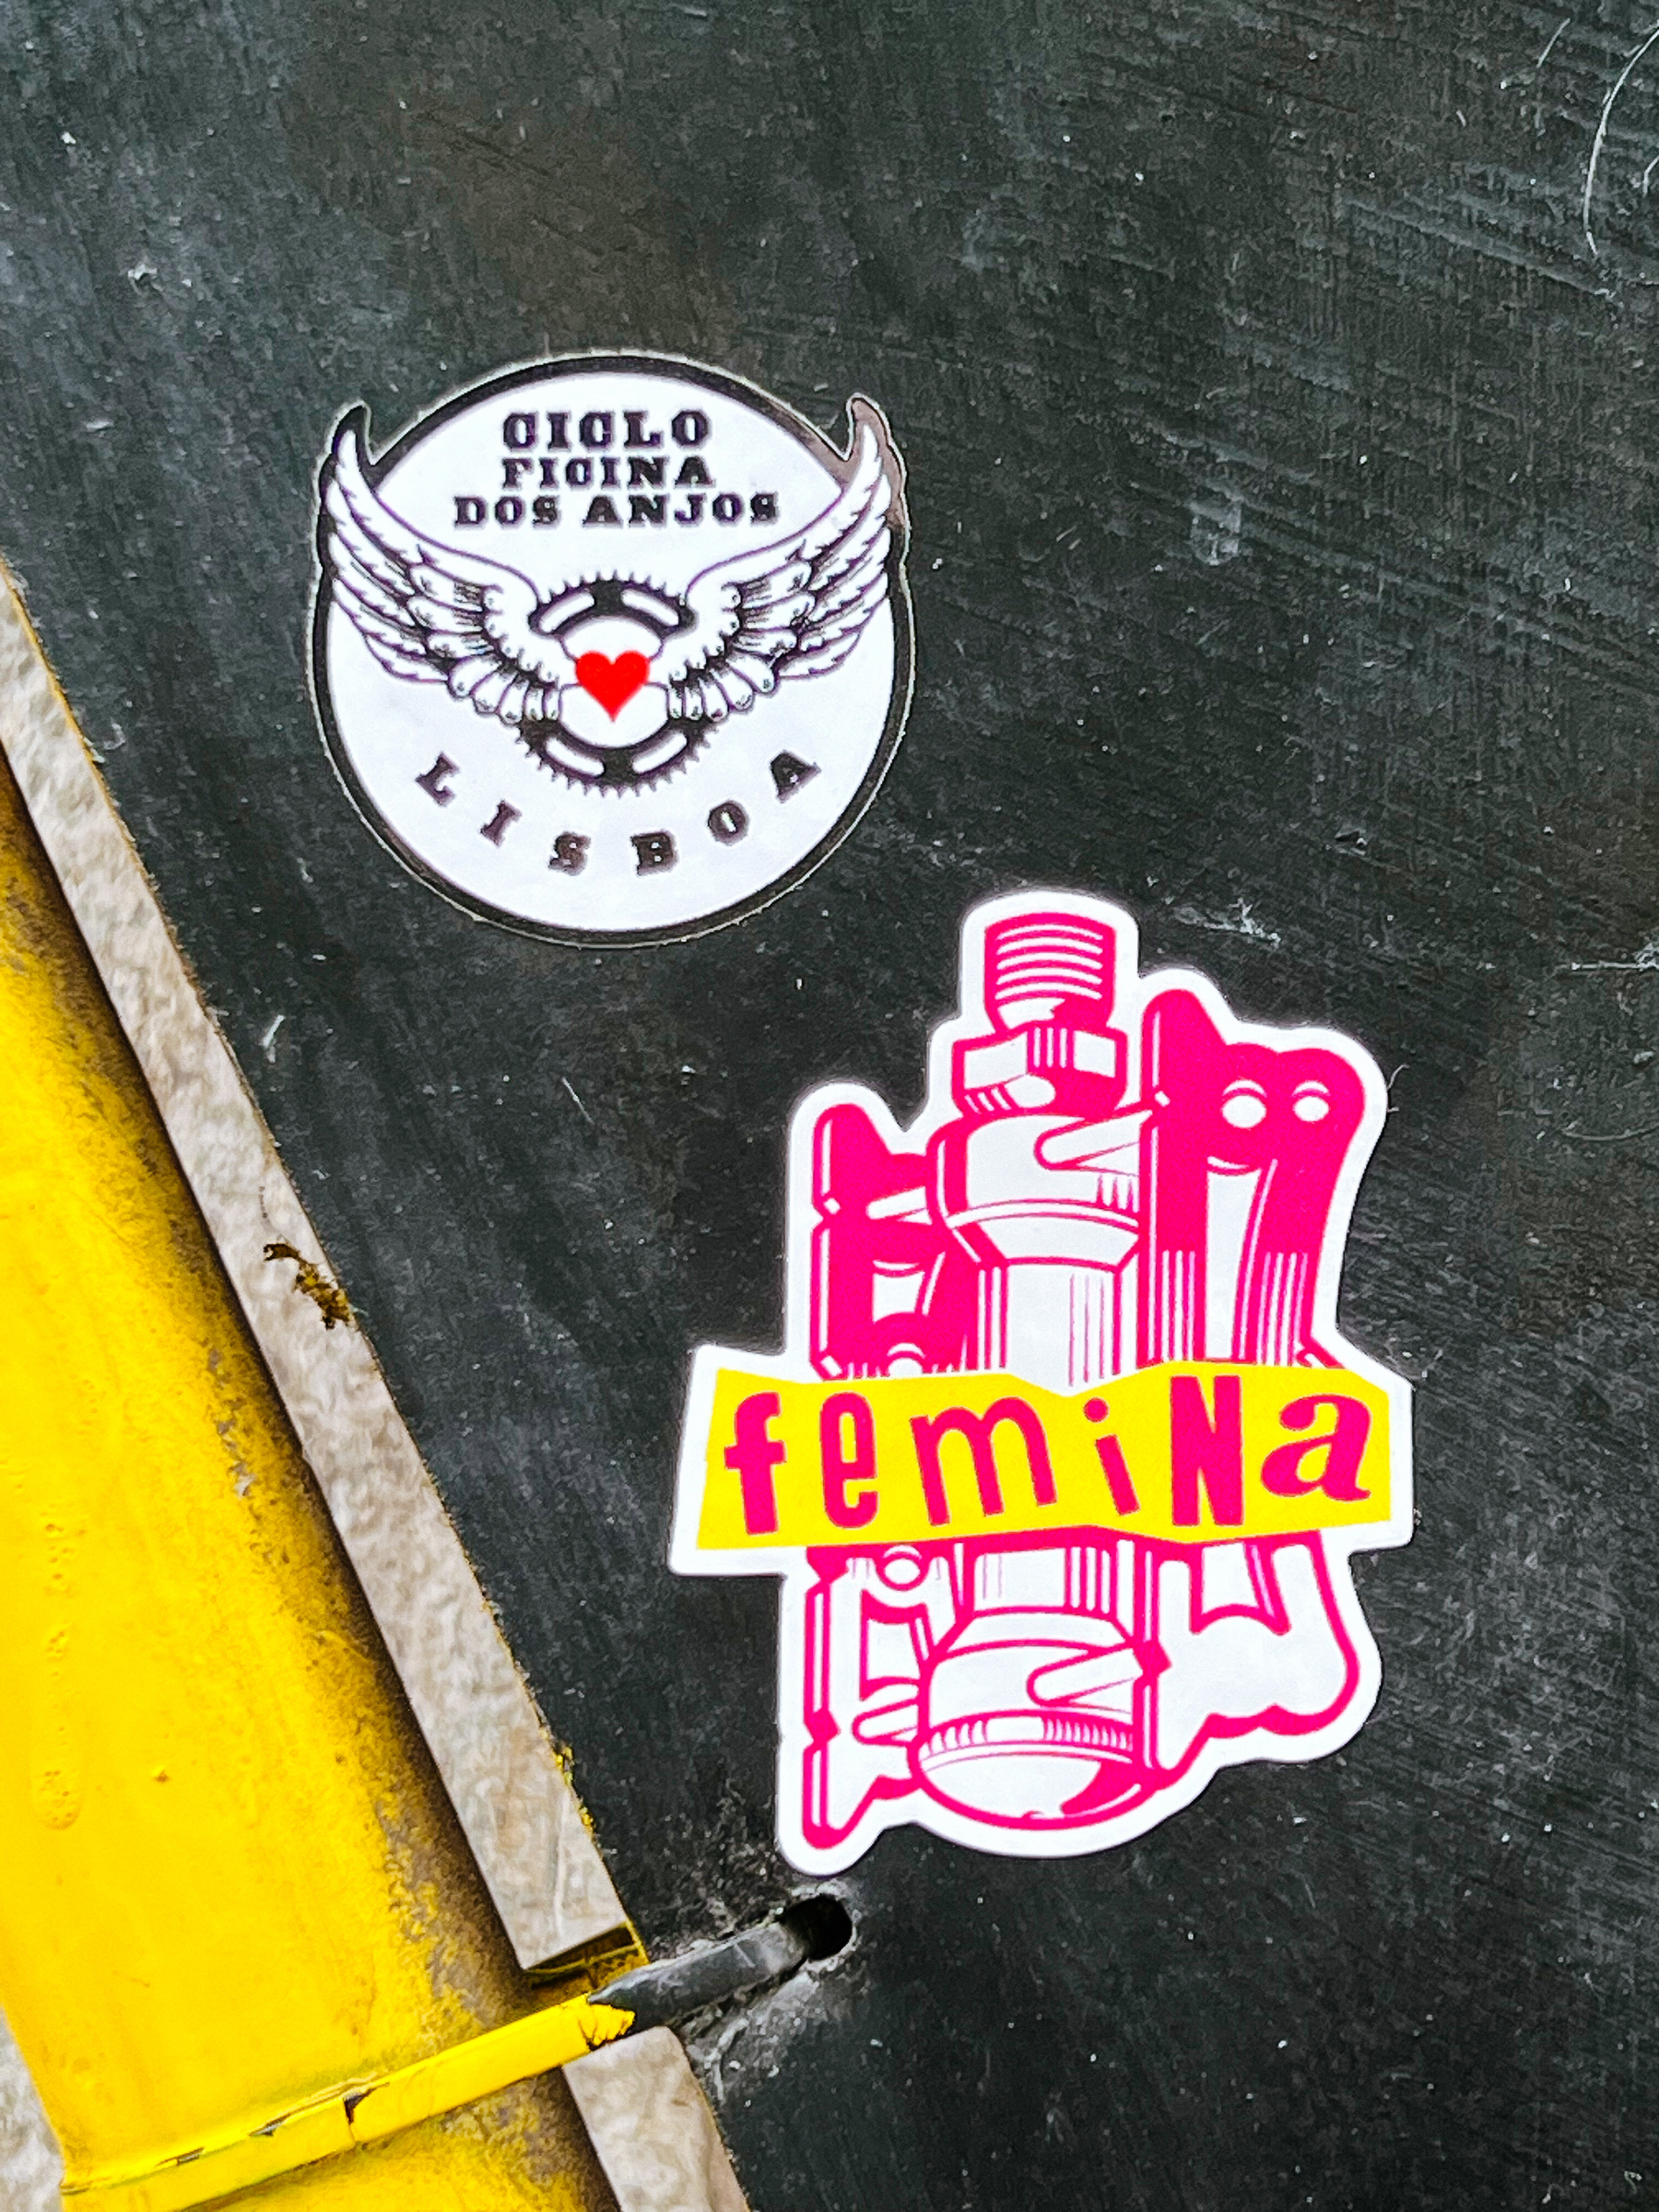 Two stickers for bicycle repair spots/community schools. “Cicloficina dos Anjos”, and “Femina”. 